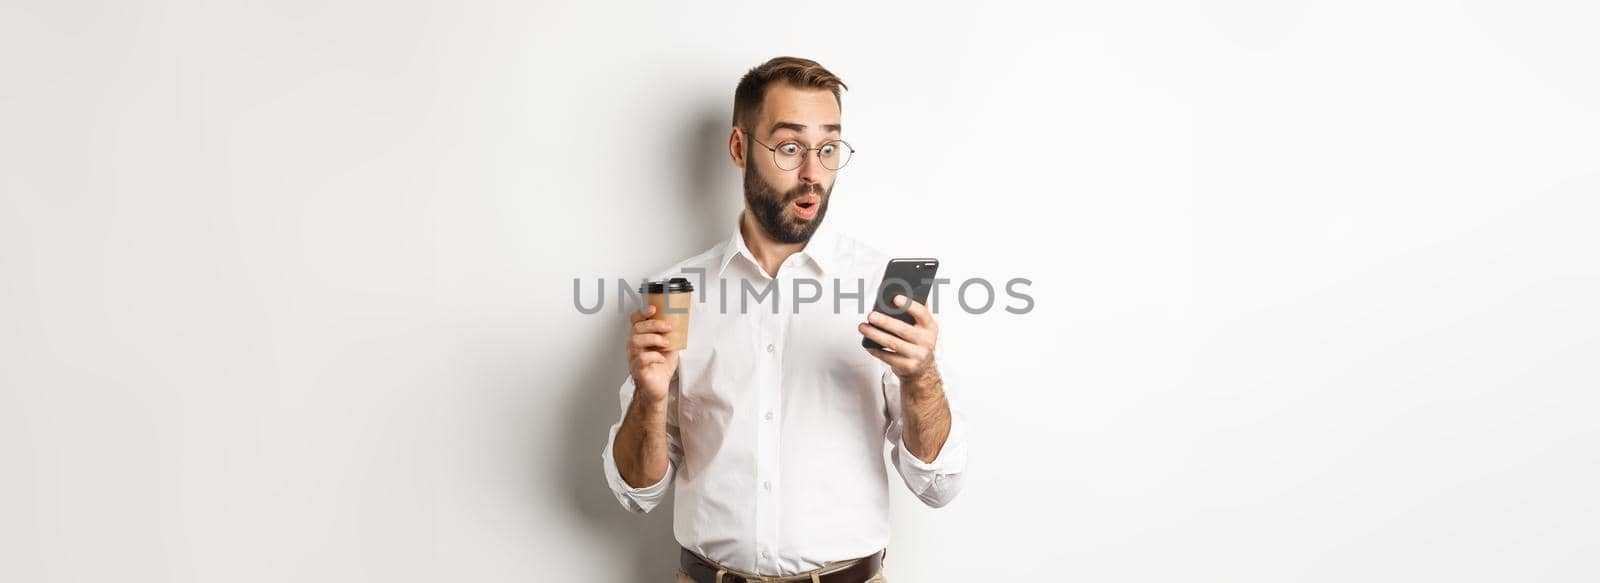 Businessman drinking coffee and looking surprised at message on mobile phone, standing amazed over white background.